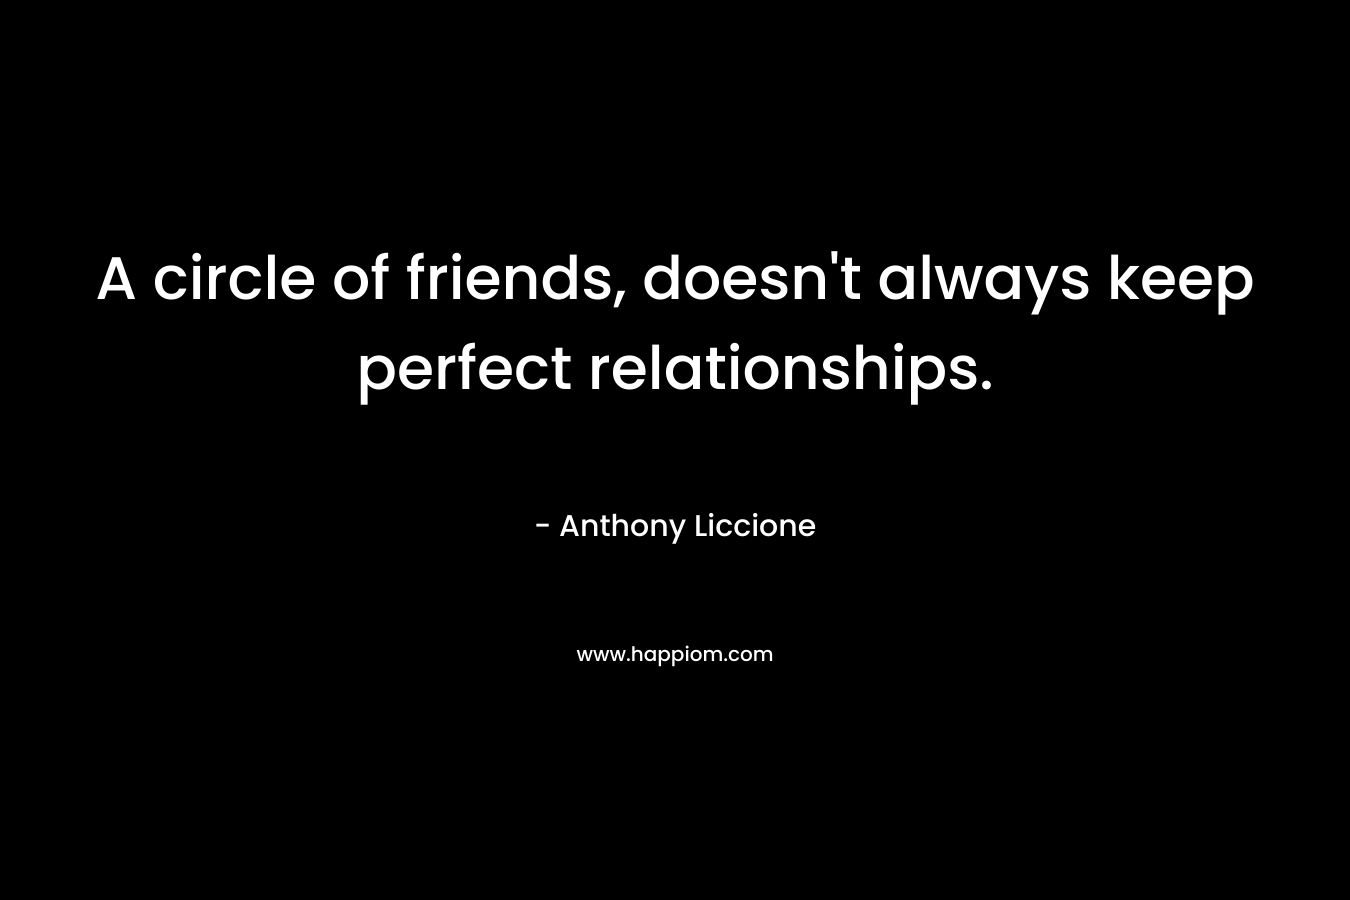 A circle of friends, doesn't always keep perfect relationships.